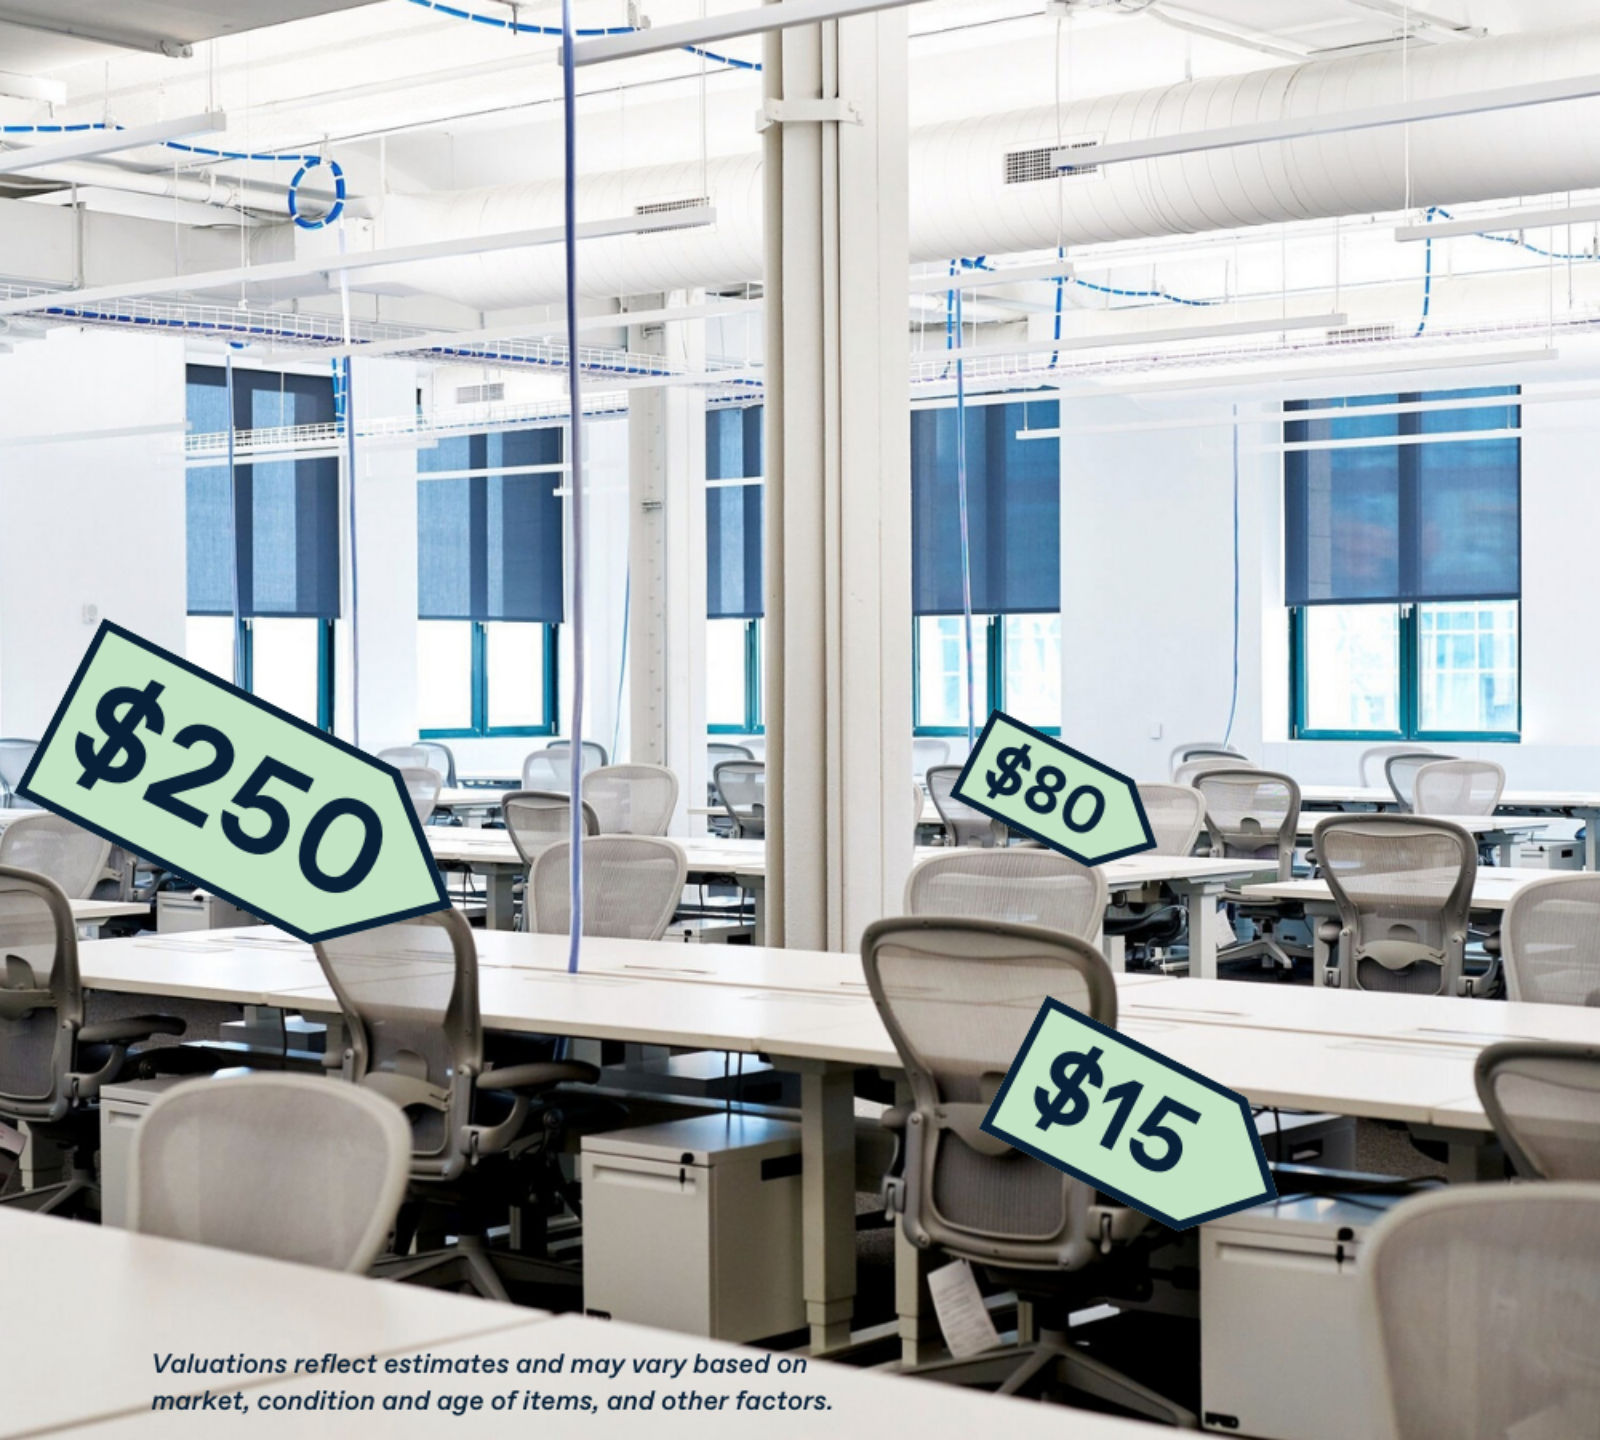 Estimated resale prices of office equipment